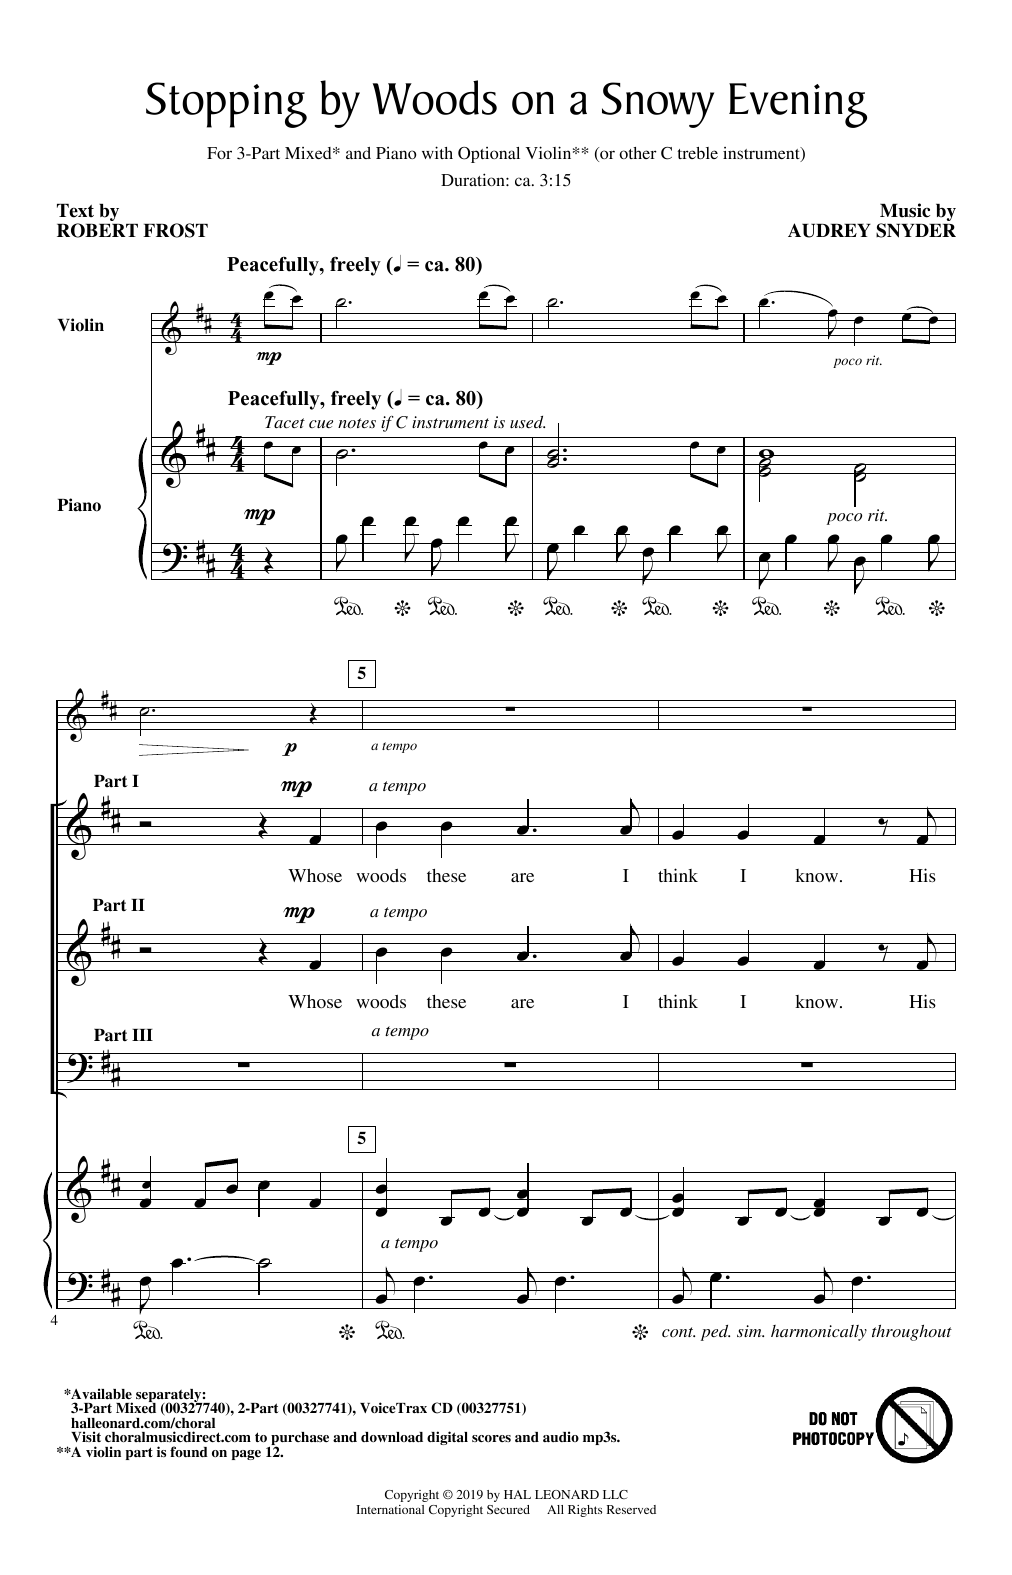 Download Audrey Snyder Stopping By Woods On A Snowy Evening Sheet Music